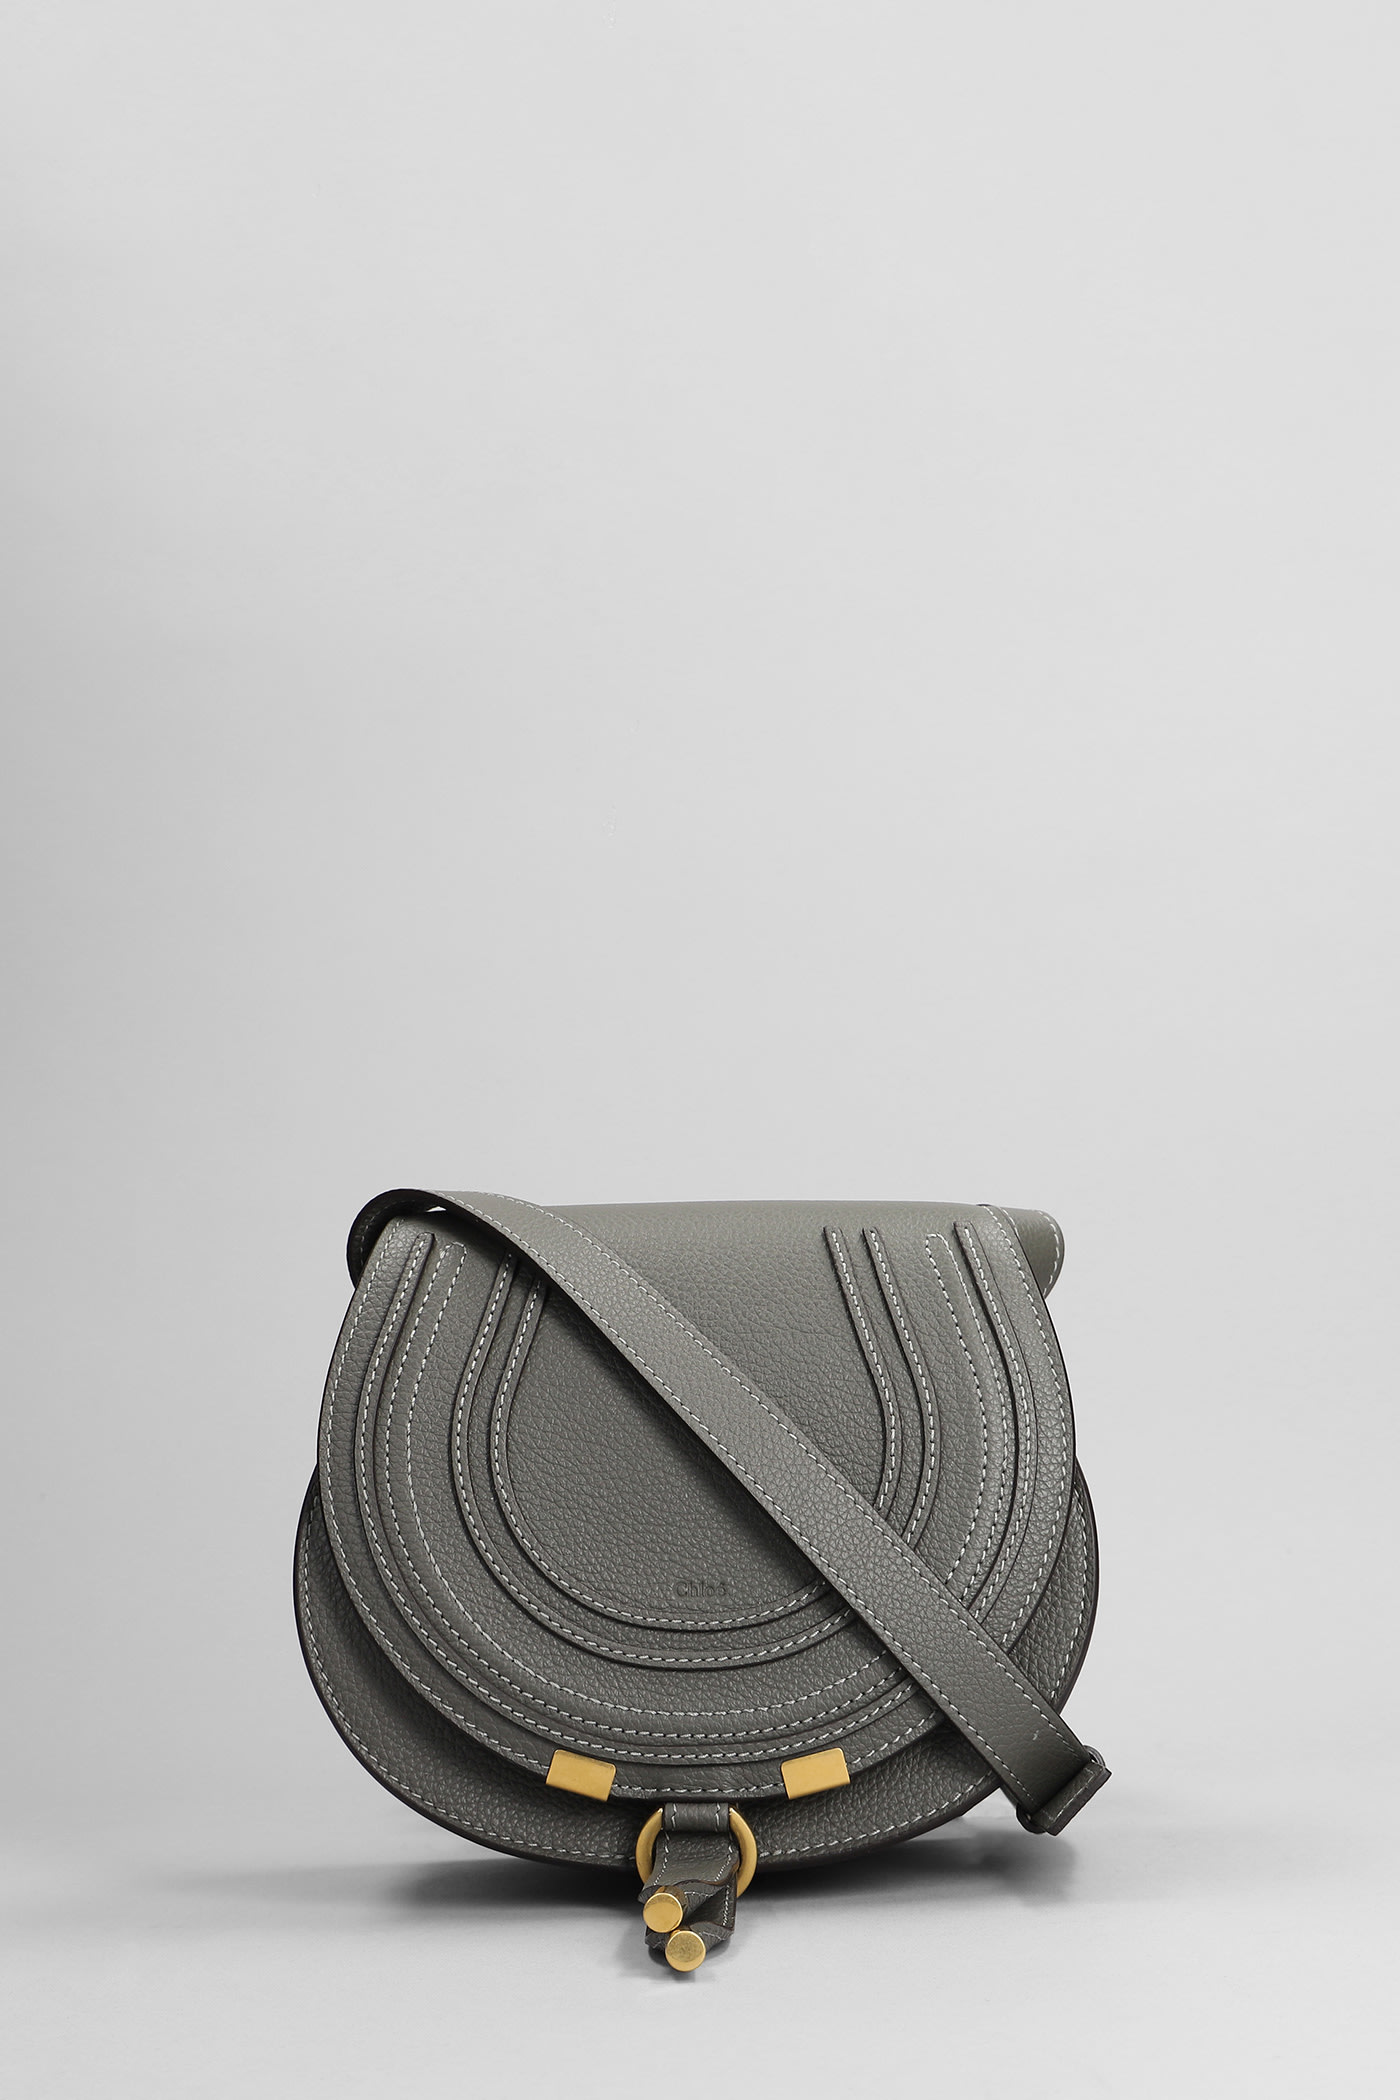 Chloé Mercie Small Shoulder Bag In Grey Leather